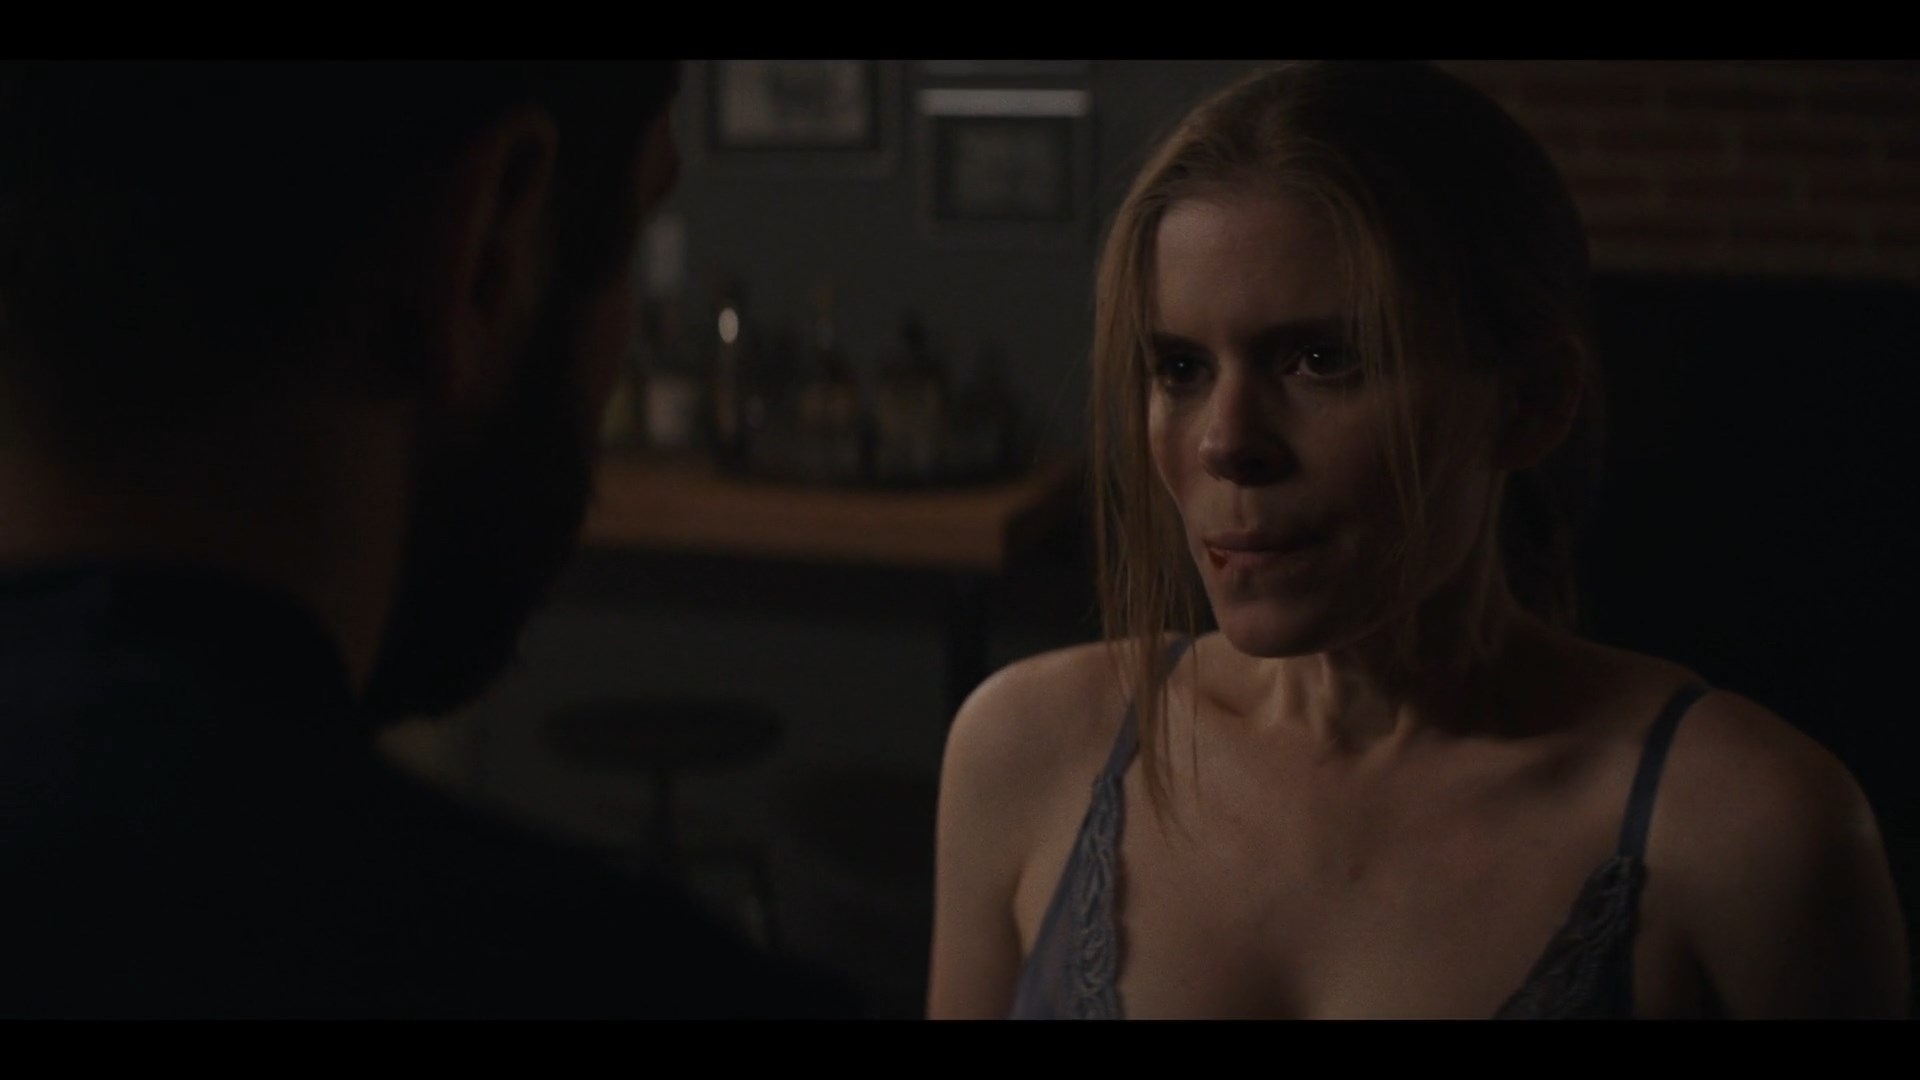 Kate Mara shows nice cleavage at the end of the long sex scene. 